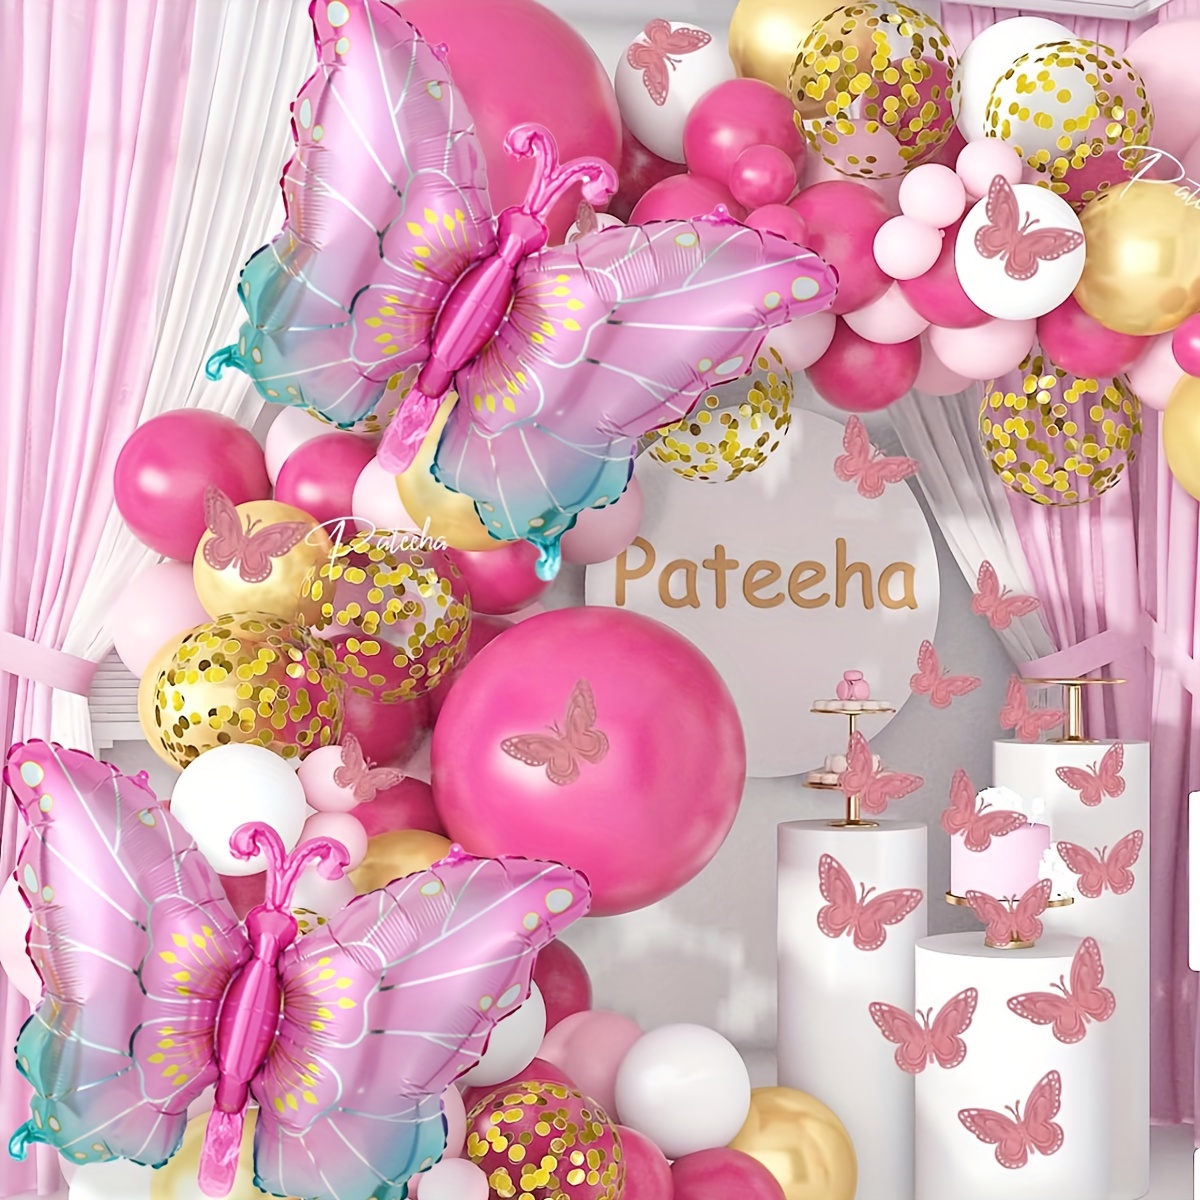 

4pcs New Pink Butterfly Balloon For Birthday Theme Party, Wedding Birthday Party Supplies With Straw And Ribbon. Eid Al-adha Mubarak